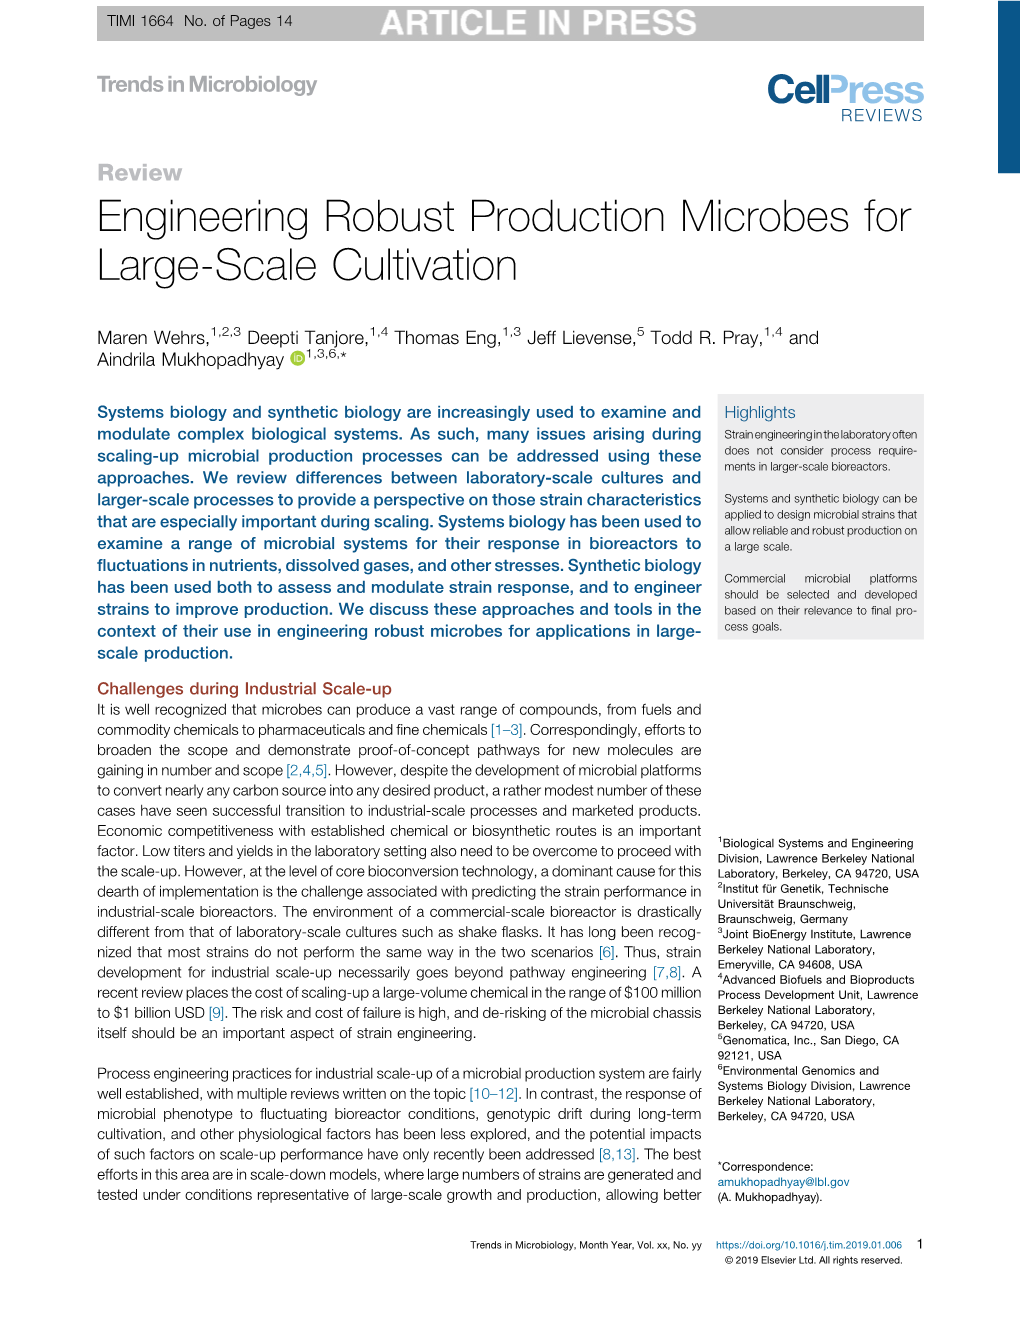 Engineering Robust Production Microbes for Large-Scale Cultivation